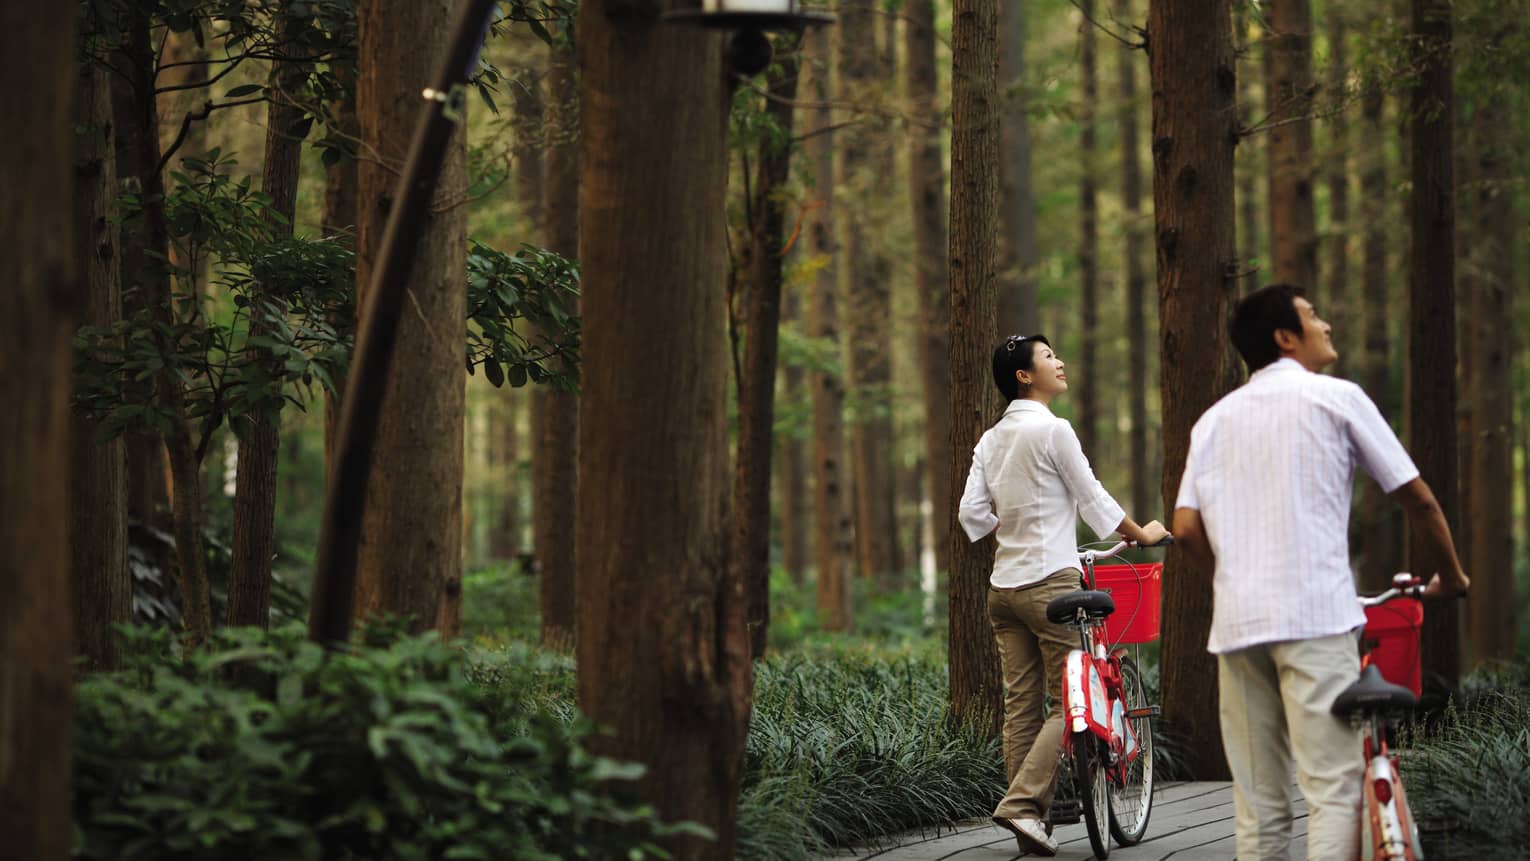 Couple walks bicycles through forest nature trail, looks up at trees